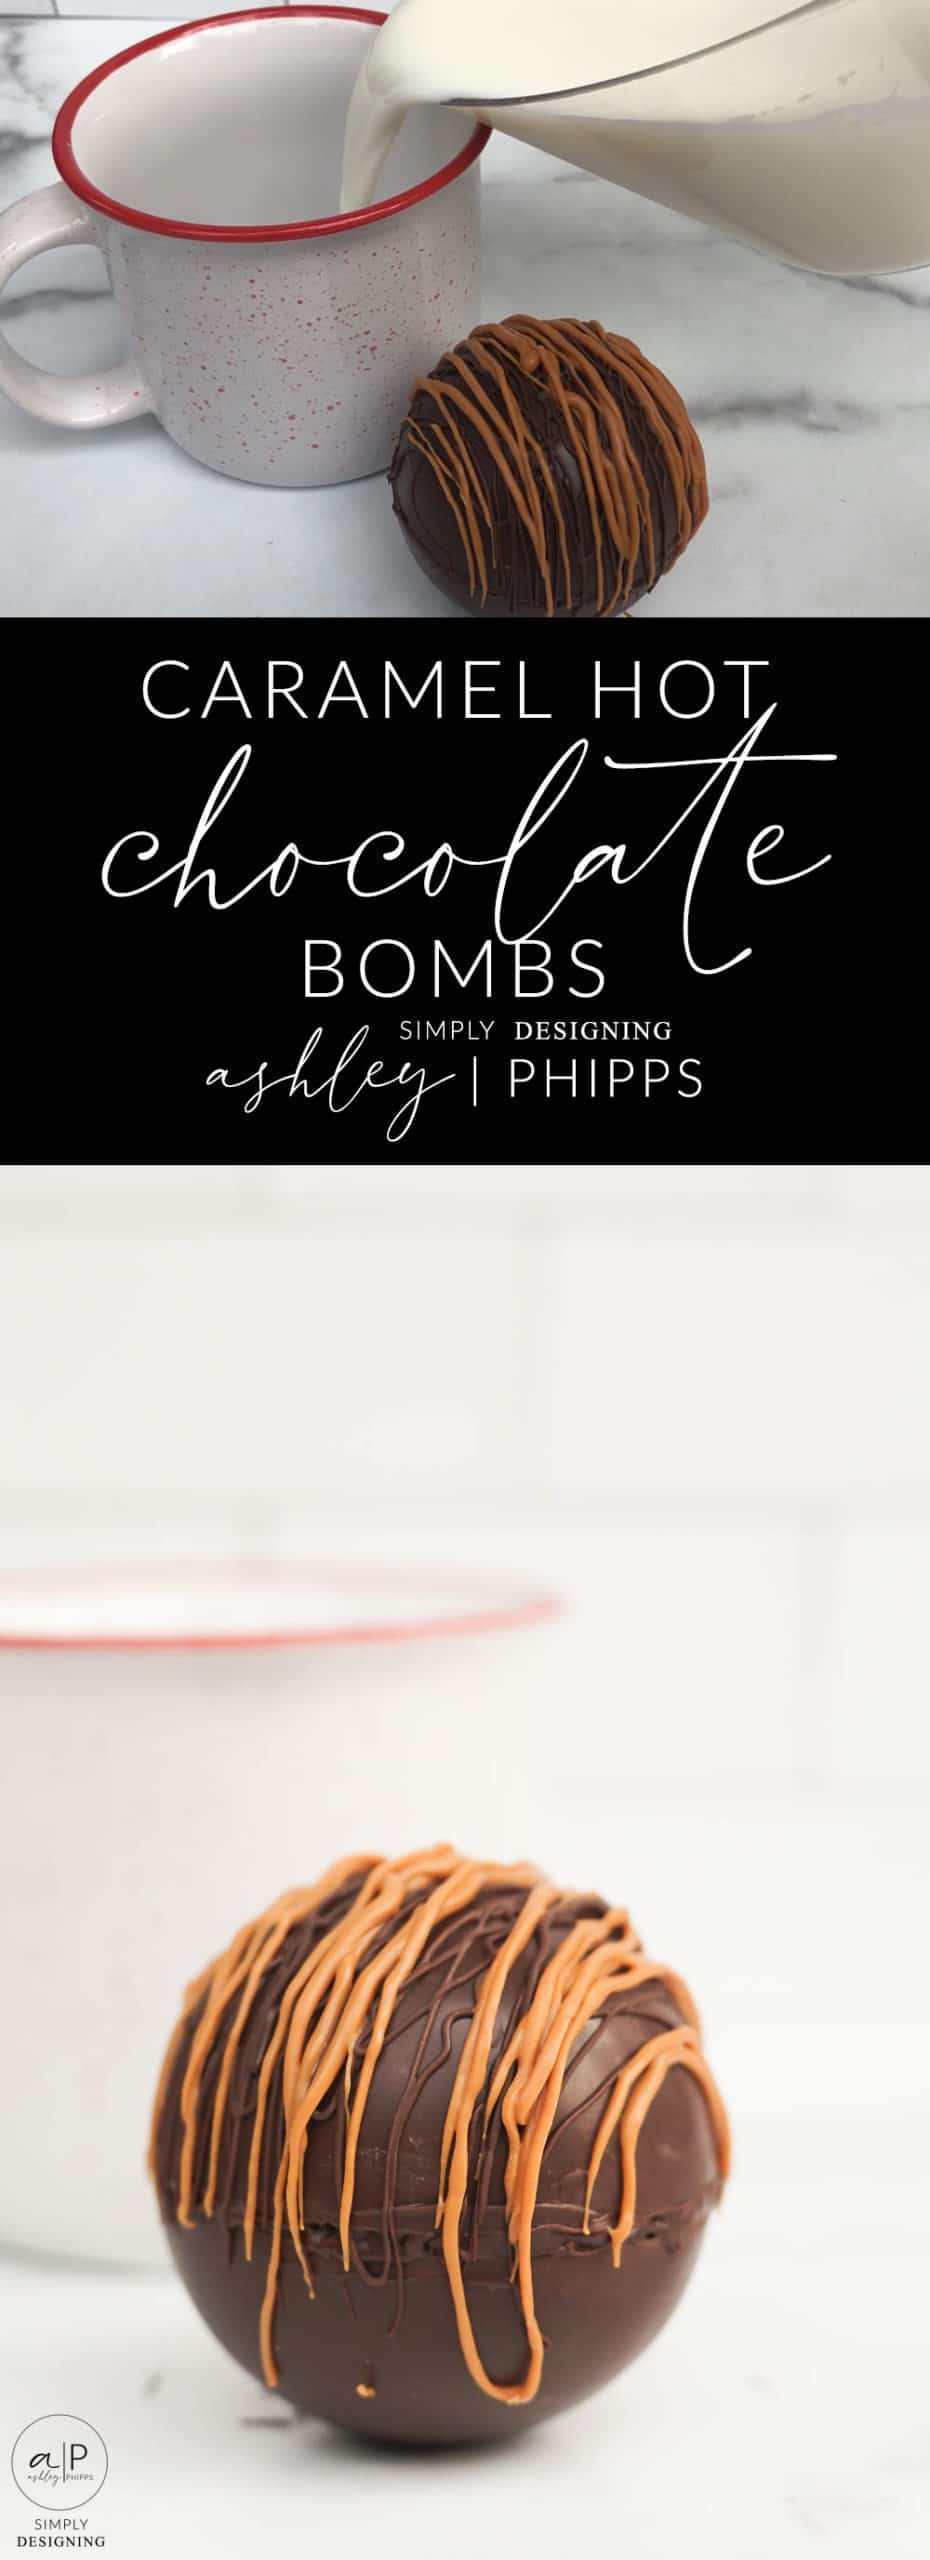 These Caramel Hot Cocoa Bombs are so rich and delicious tasting made with delicious chocolate hot cocoa mix and caramel for a scrumptious warm drink